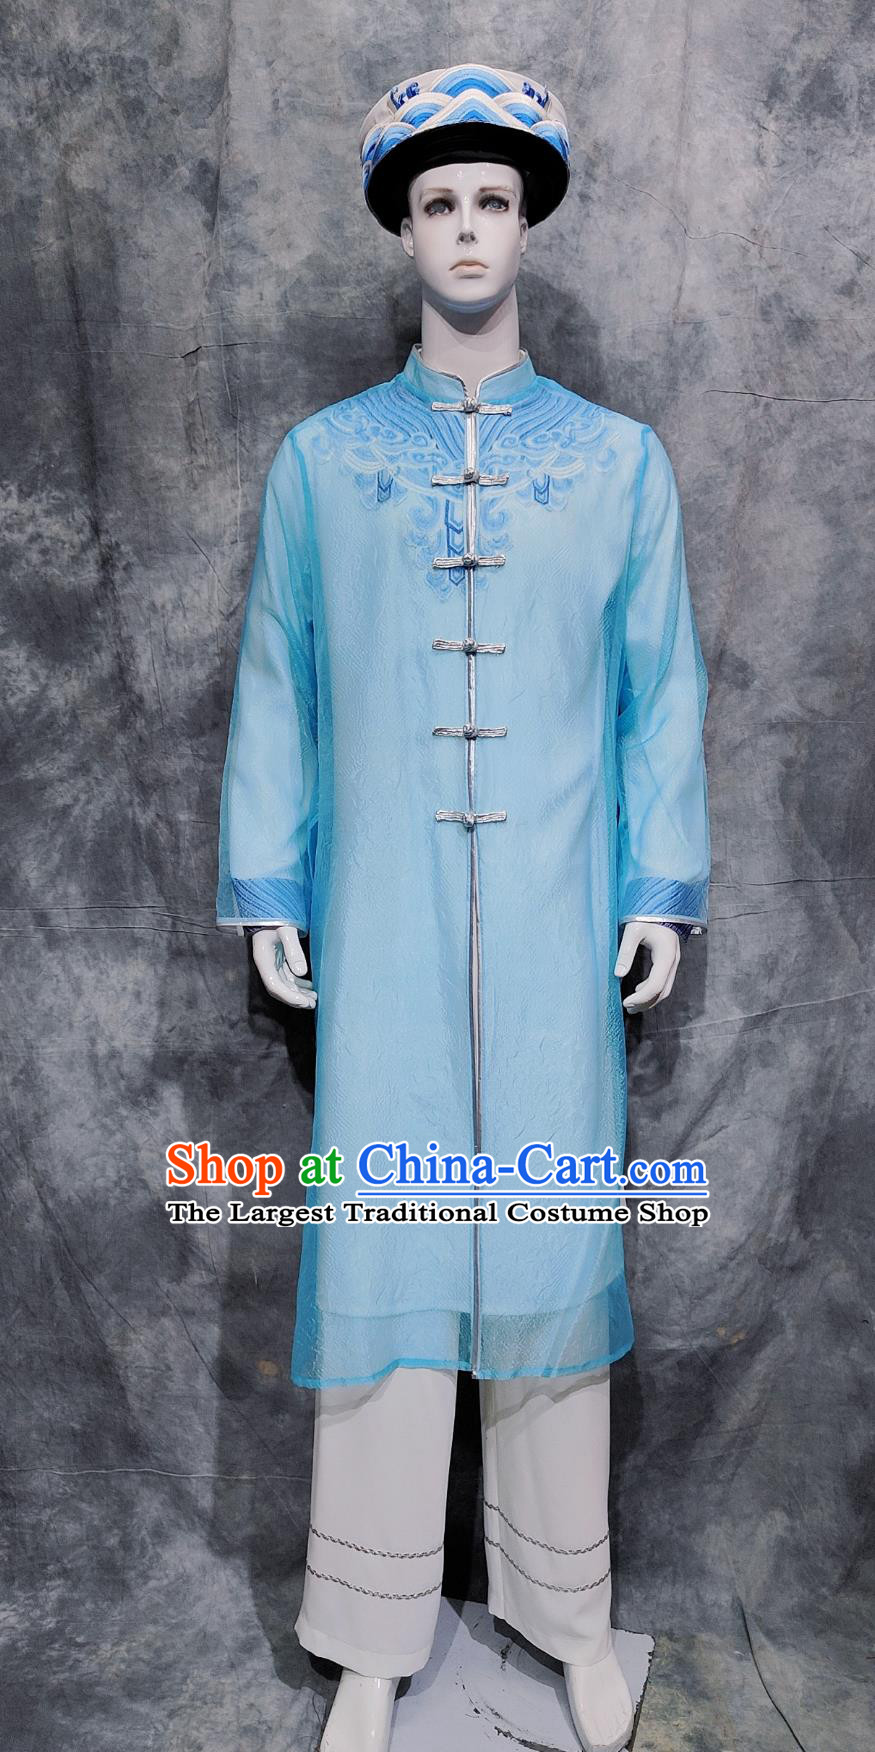 China Jing National Minority Male Blue Outfit Traditional String Instrument Performance Costume Chinese Ethnic Festival Clothing